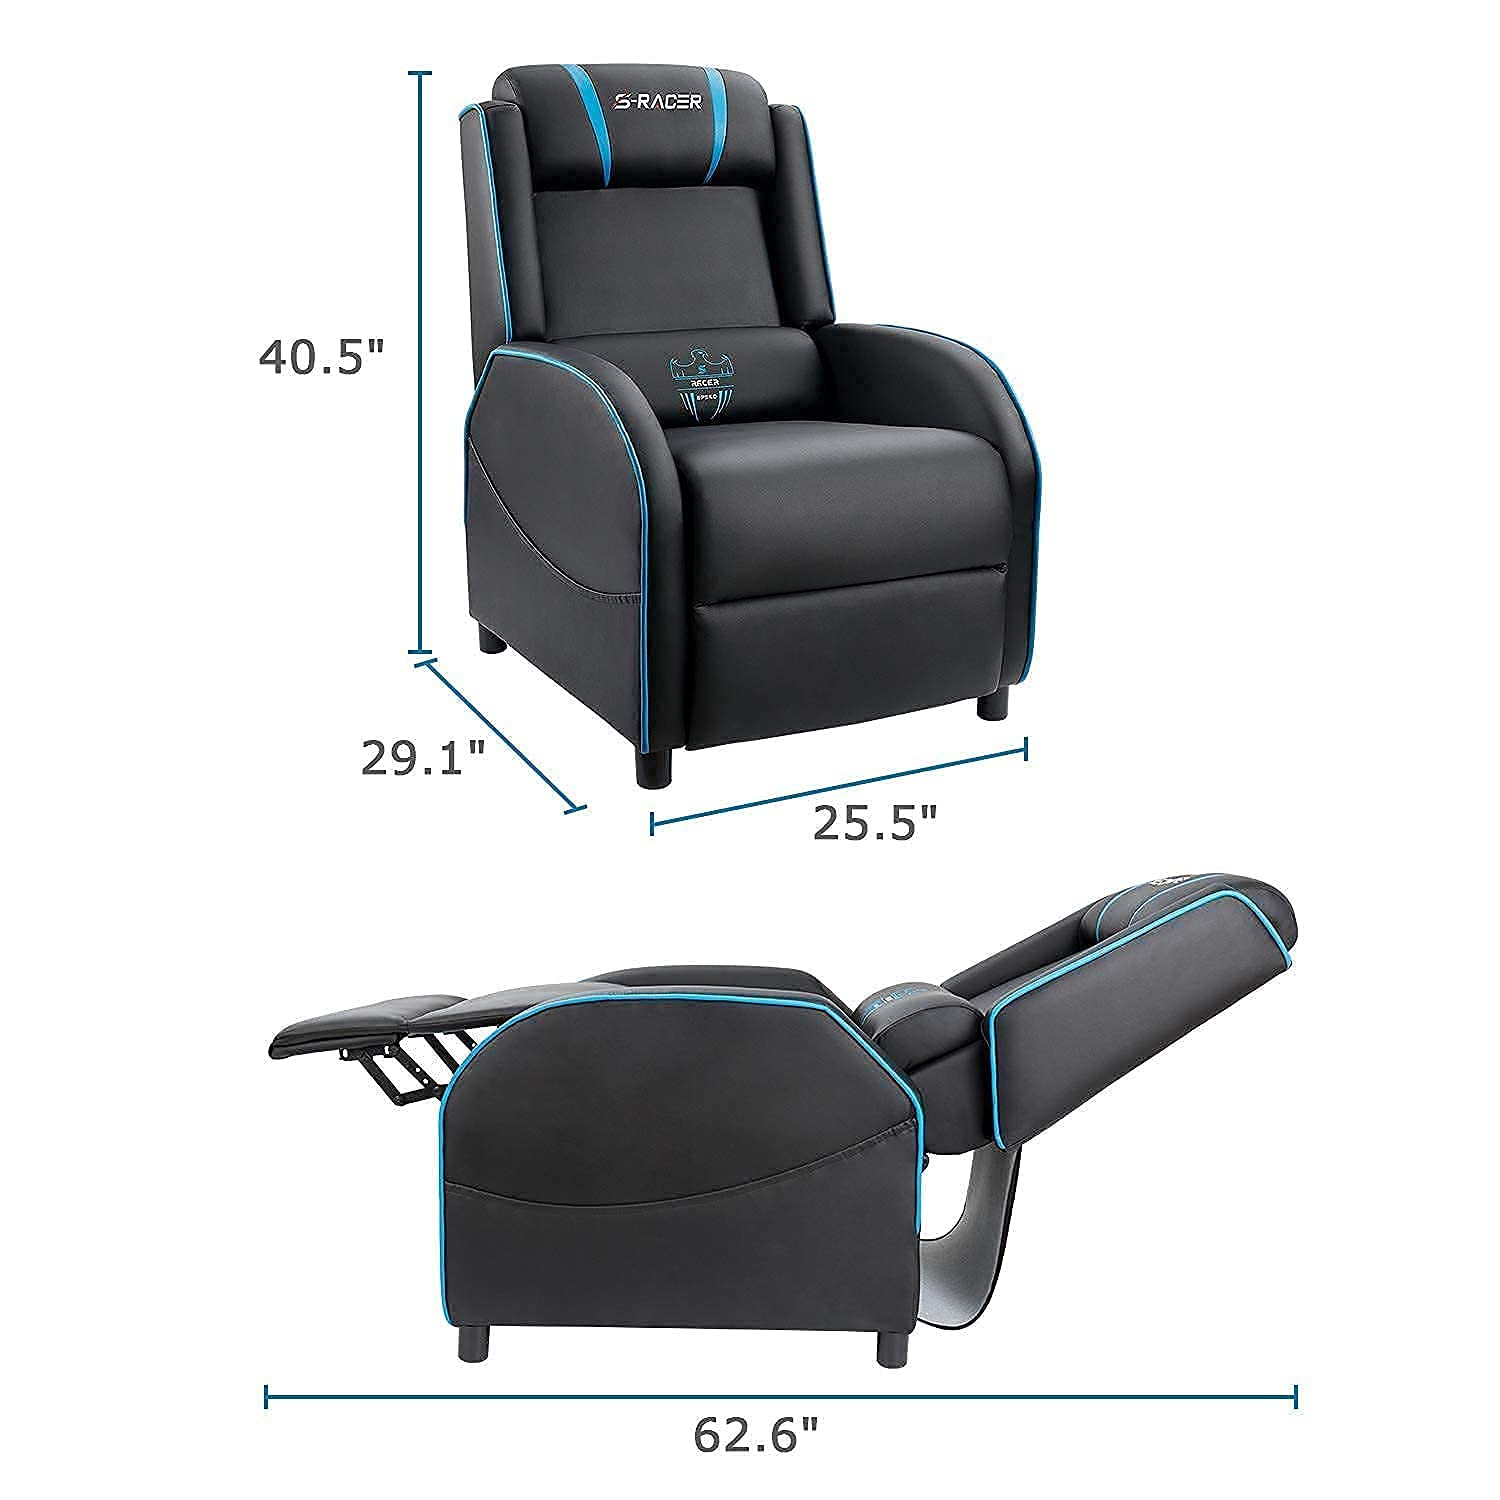 Homall Massage Gaming Recliner Chair, Racing Style Gaming Sofa, PU Leather Home Theater Seating, Modern Living Room Recliners Ergonomic Comfortable Gamer Lounge(Blue)